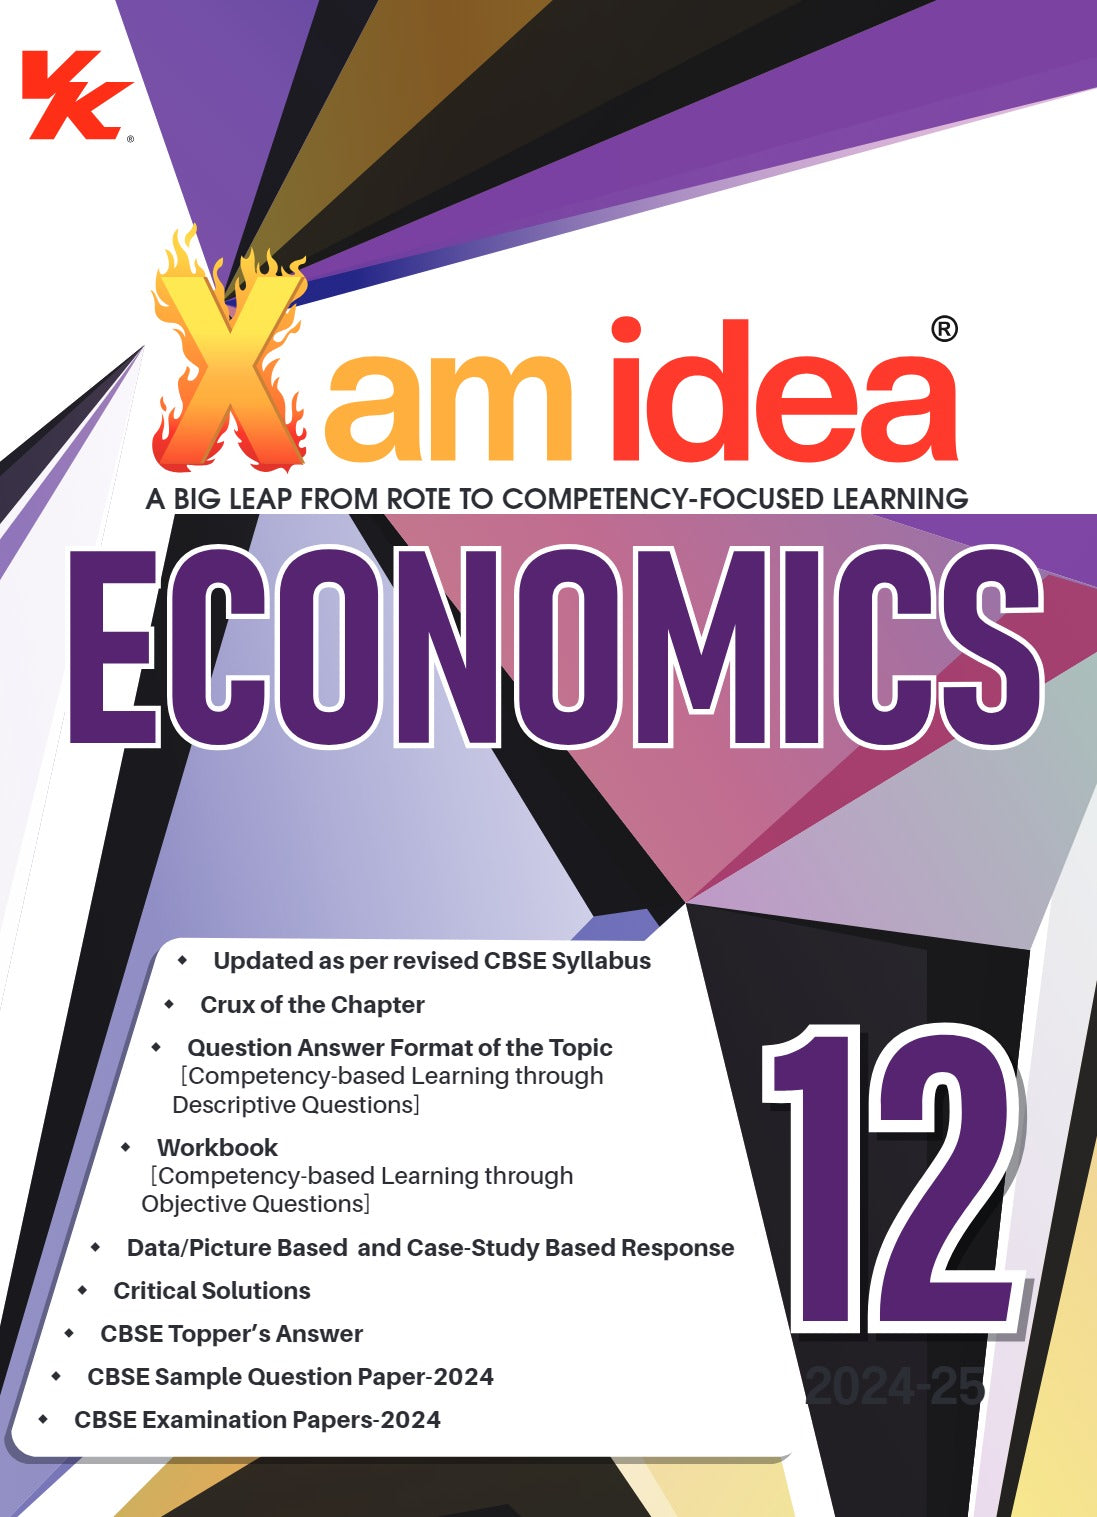 Xam idea Economics Class 12 Book | CBSE Board | Chapterwise Question Bank | Based on Revised CBSE Syllabus | NCERT Questions Included | 2024-25 Exam